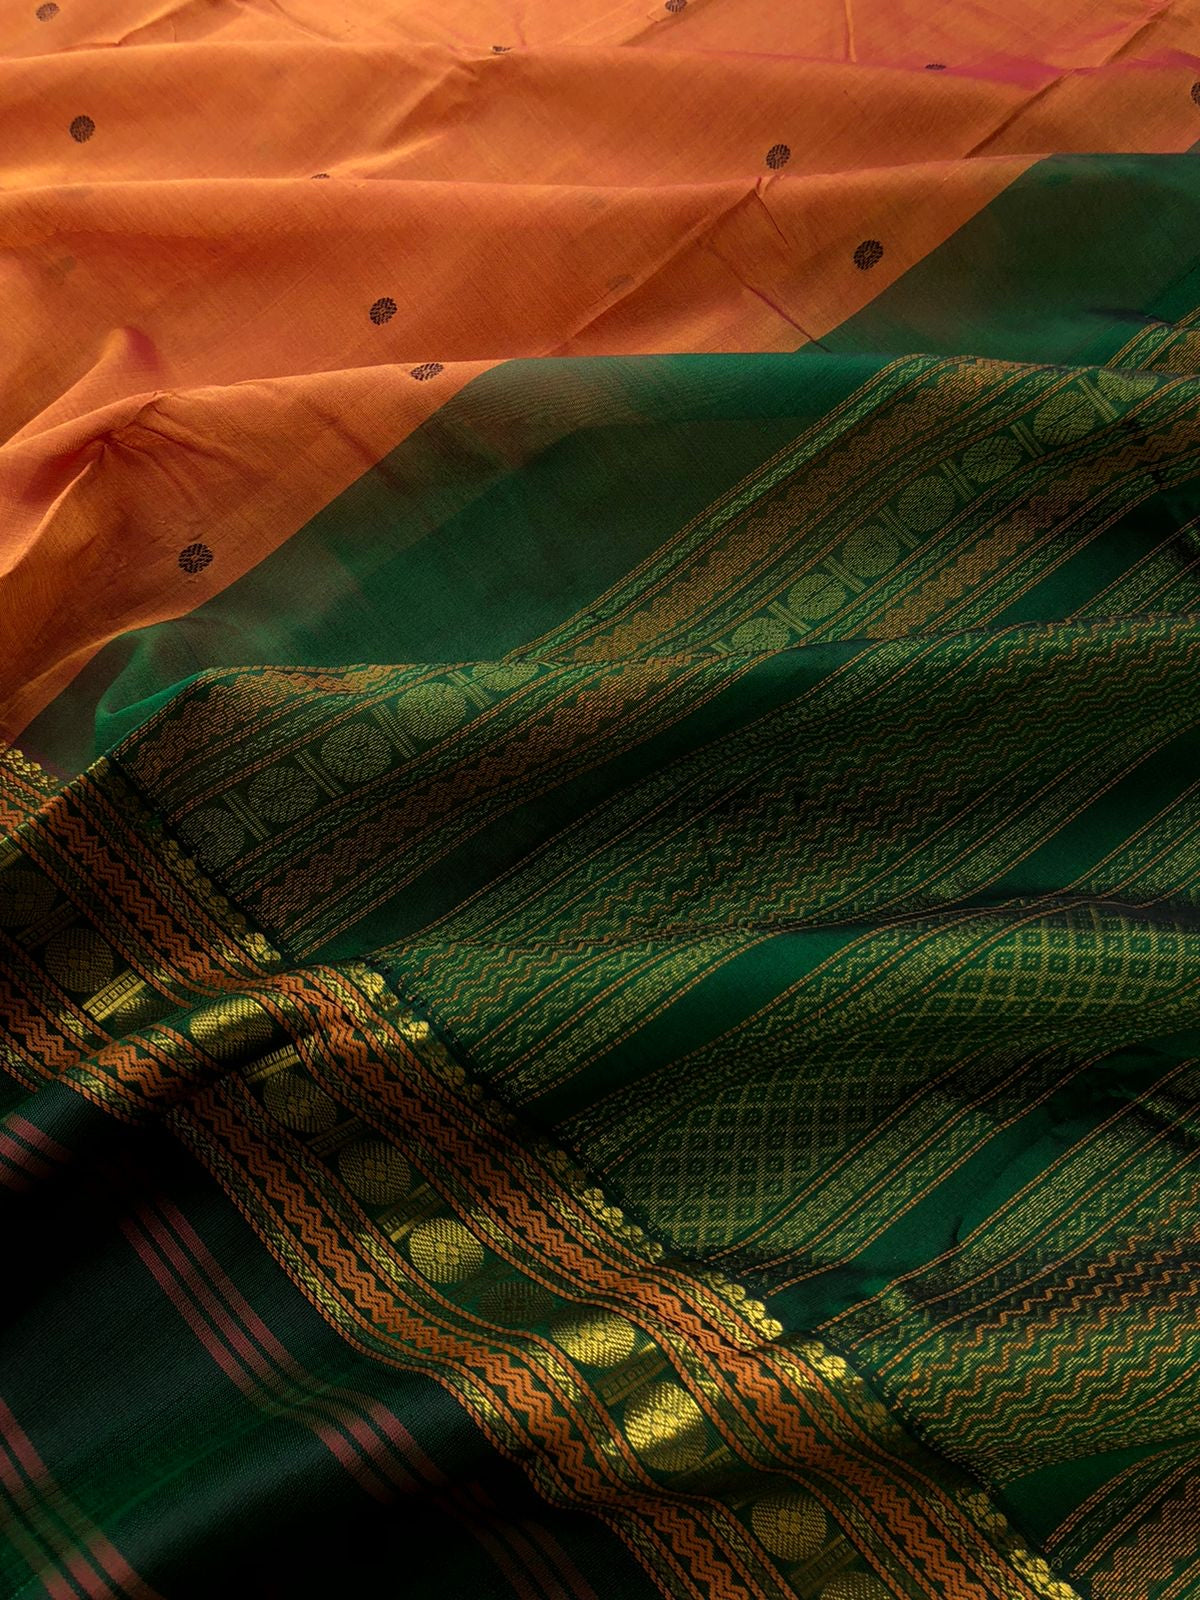 Divyam - Korvai Silk Cotton with Pure Silk Woven Borders - rust honey brown and Meenakshi green